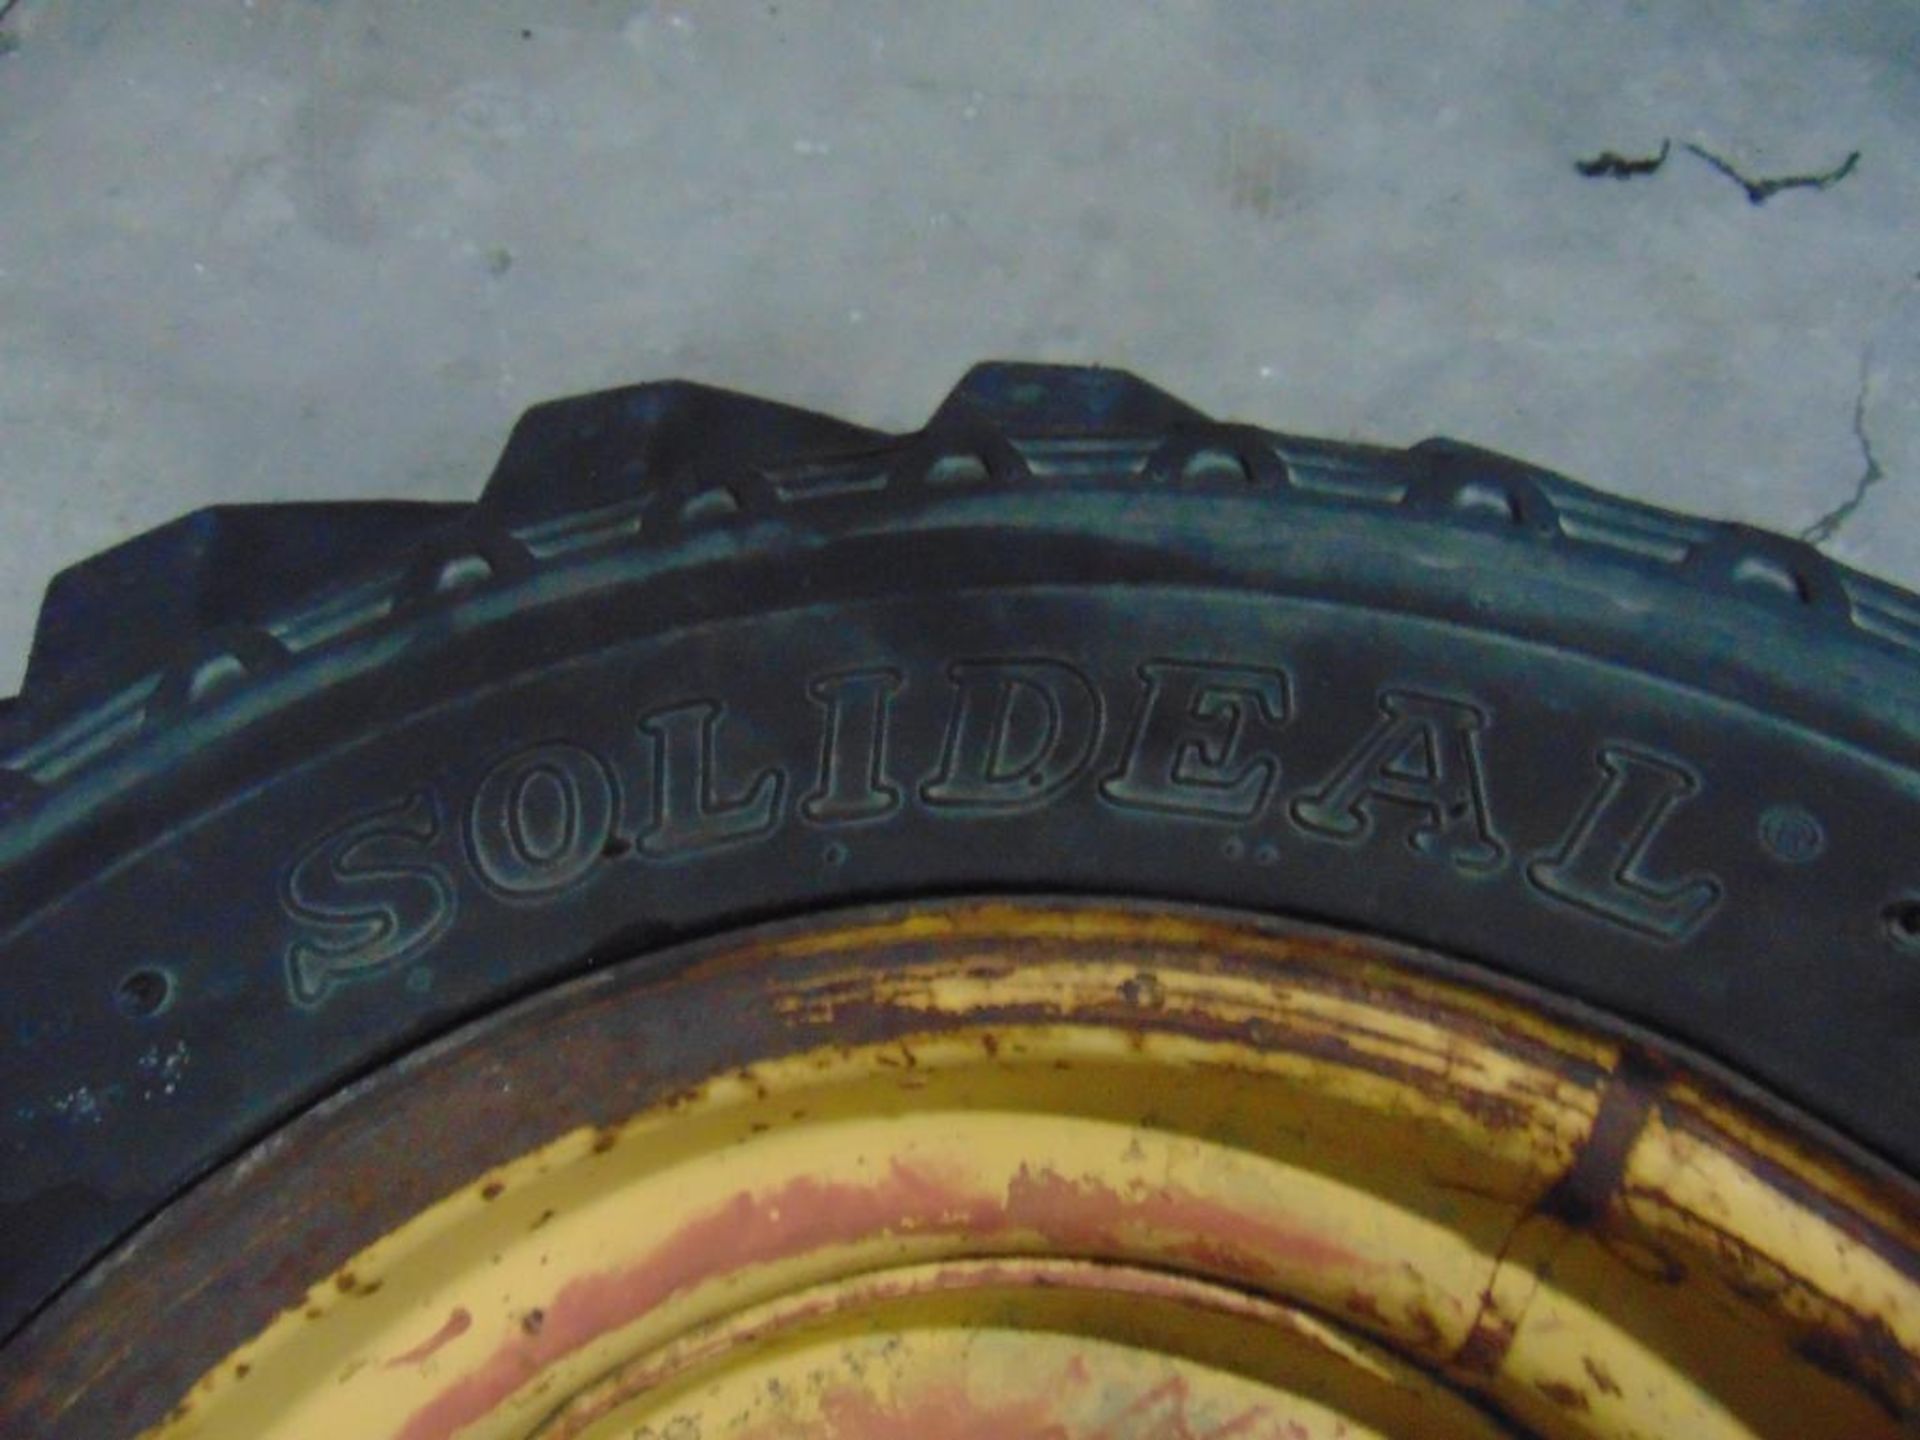 Lot of Tires and Rims* - Image 18 of 24